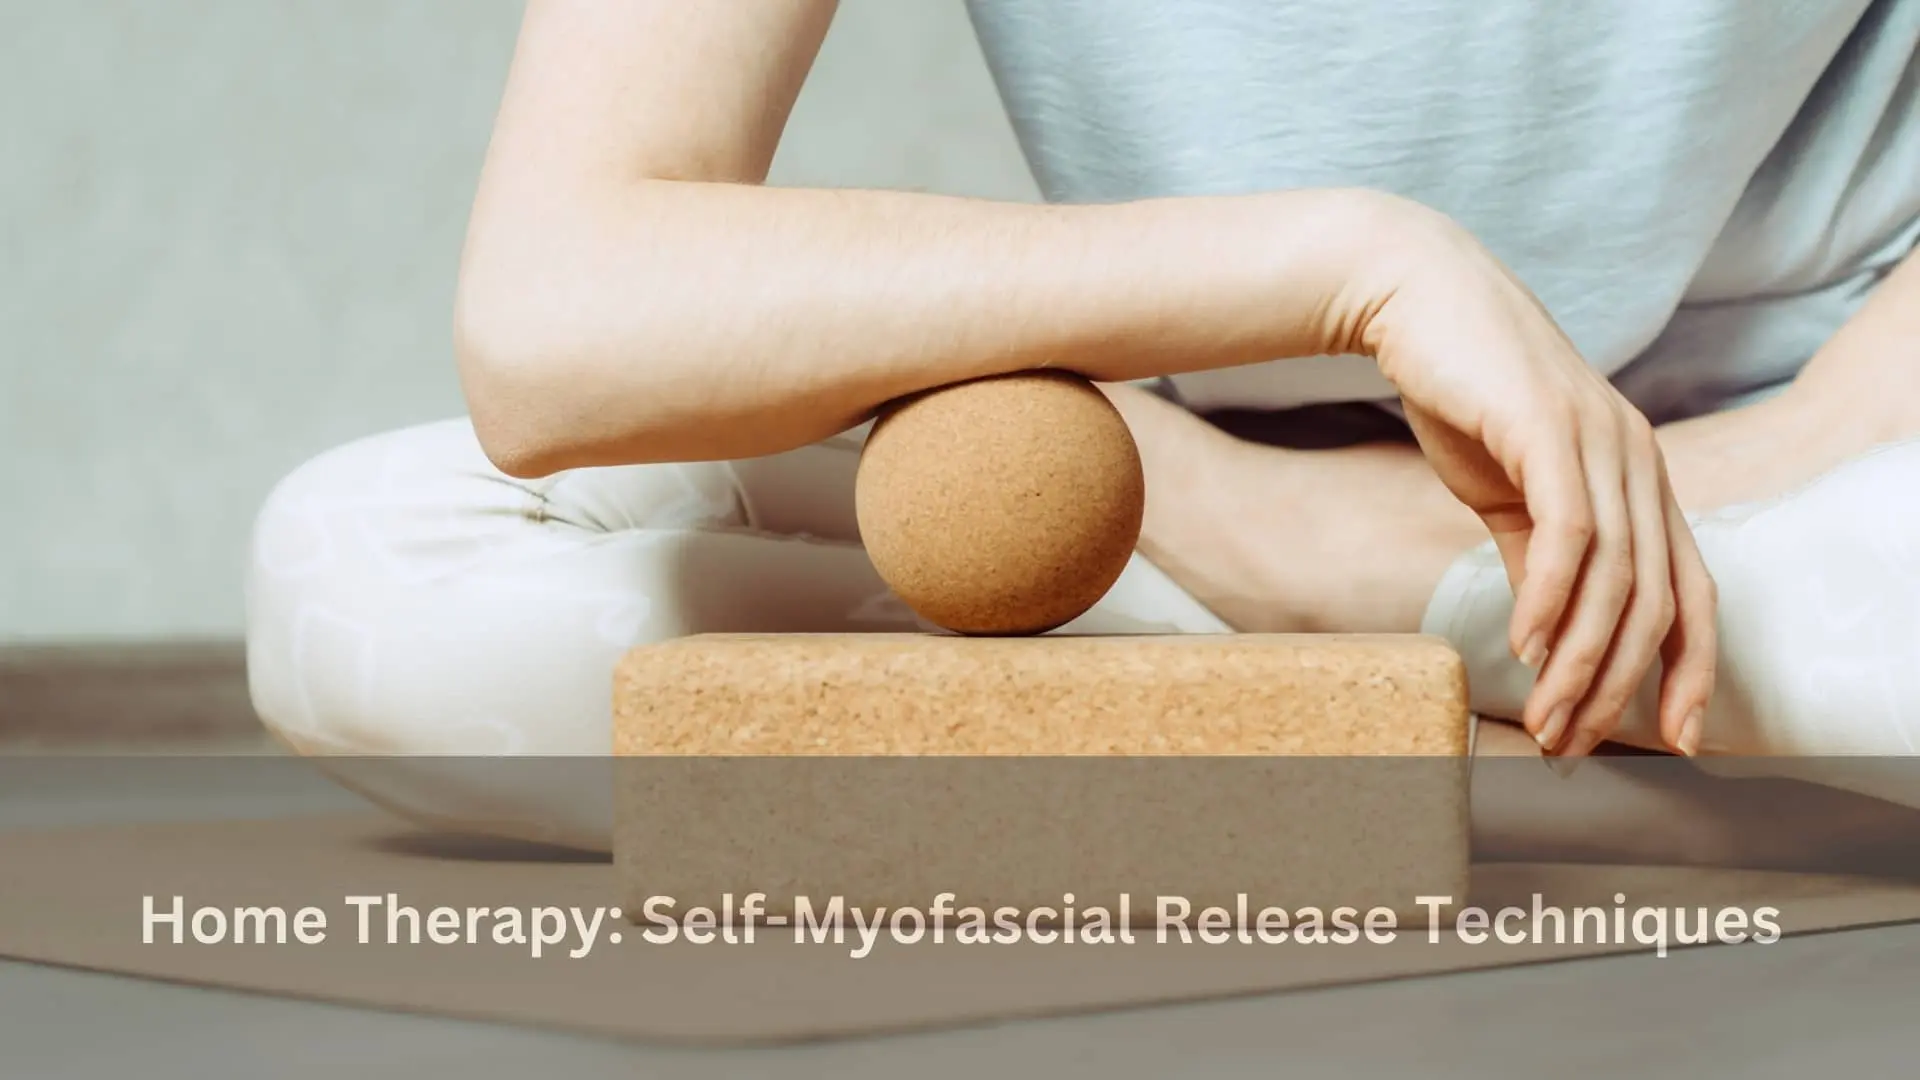 Home Therapy: Self-Myofascial Release Techniques